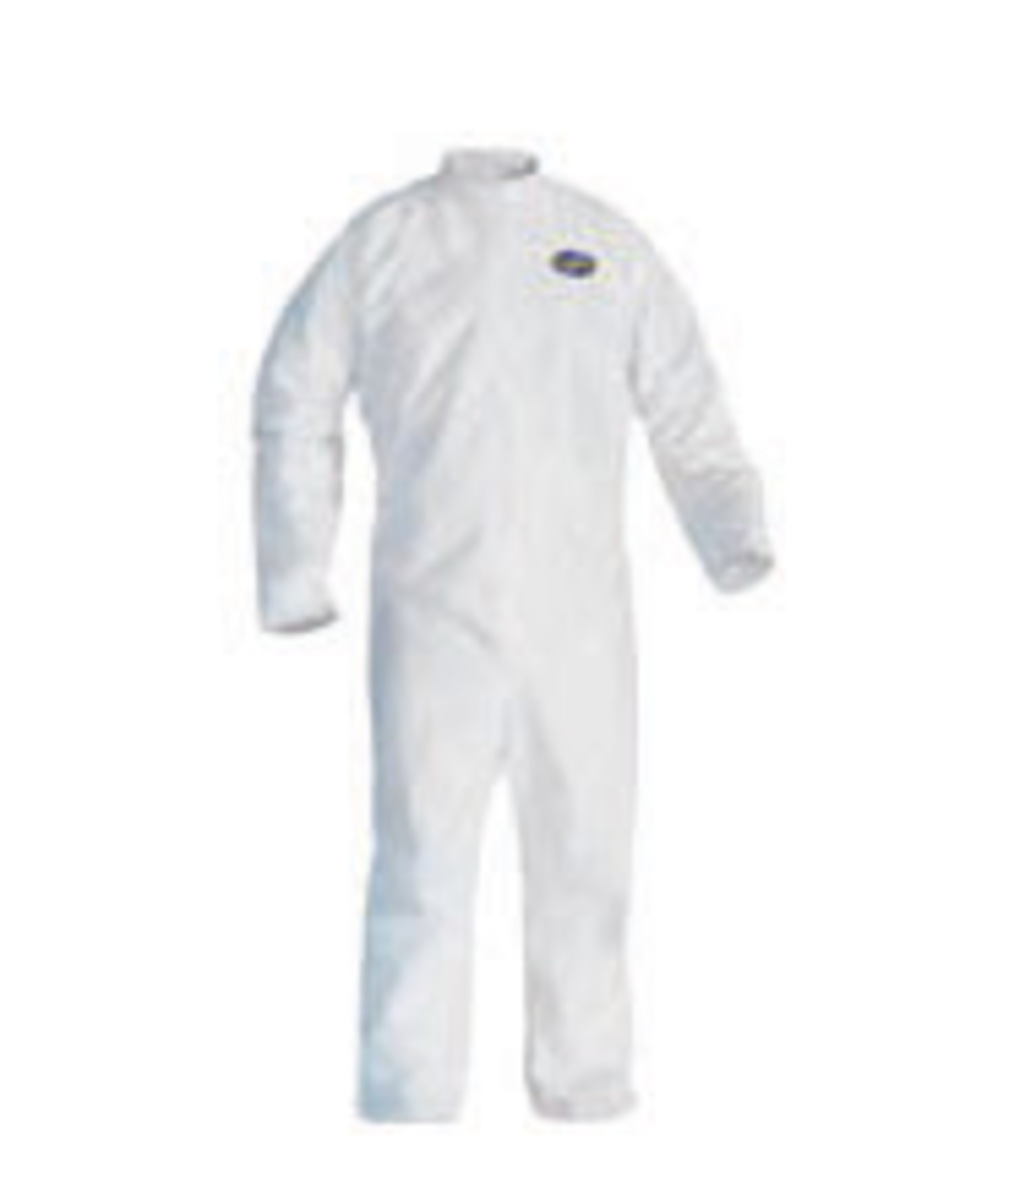 Kimberly-Clark Professional™ 2X White KleenGuard™ A30 SMS Disposable Coveralls (Availability restrictions apply.)